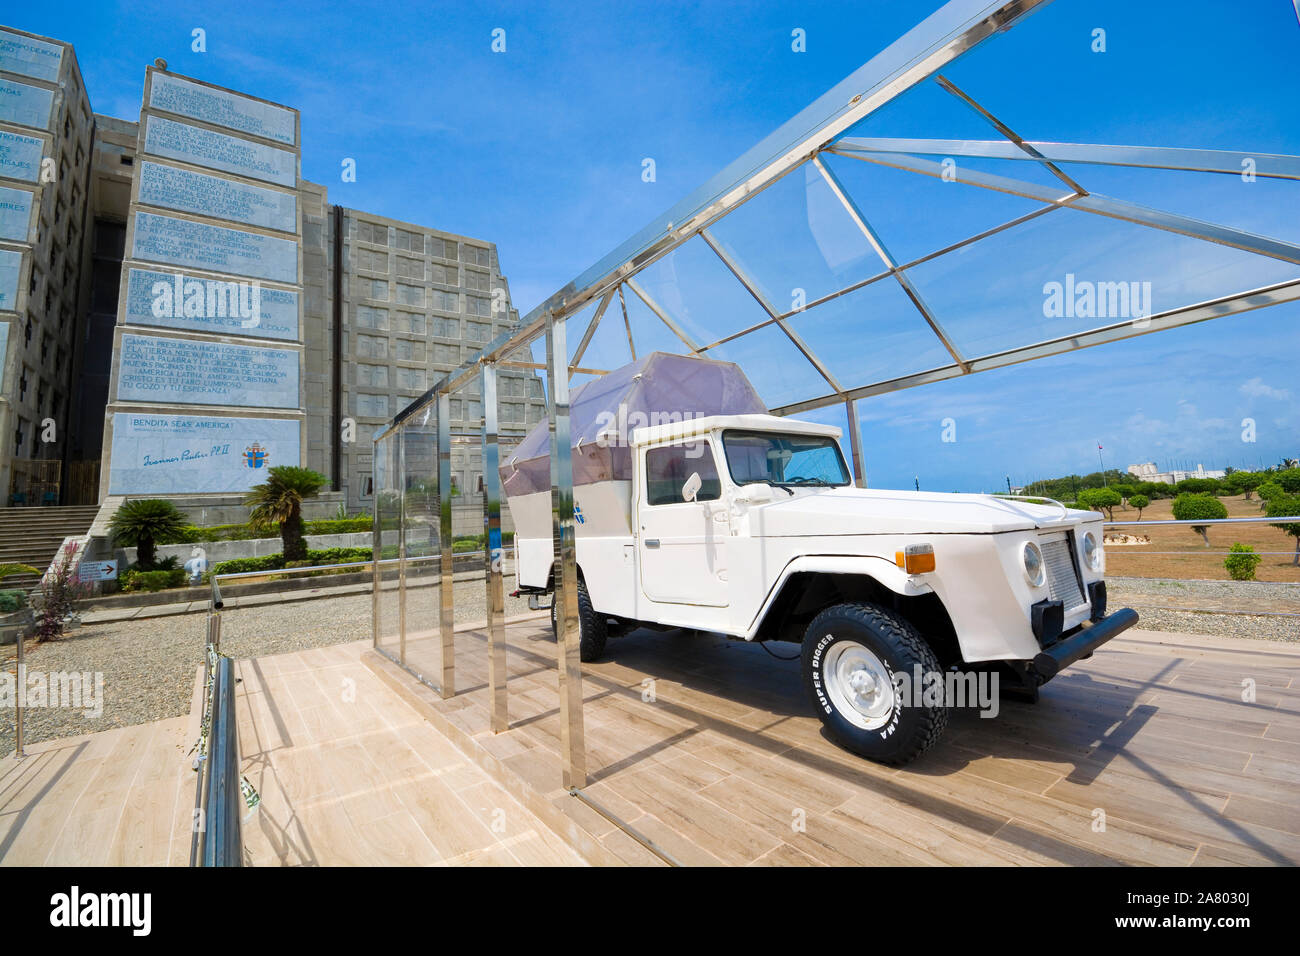 SANTO DOMINGO, DOMINICAN REPUBLIC - JUNE 26, 2019: Pope car next to Christopher Columbus lighthouse - museum monument made of reinforced concrete Stock Photo